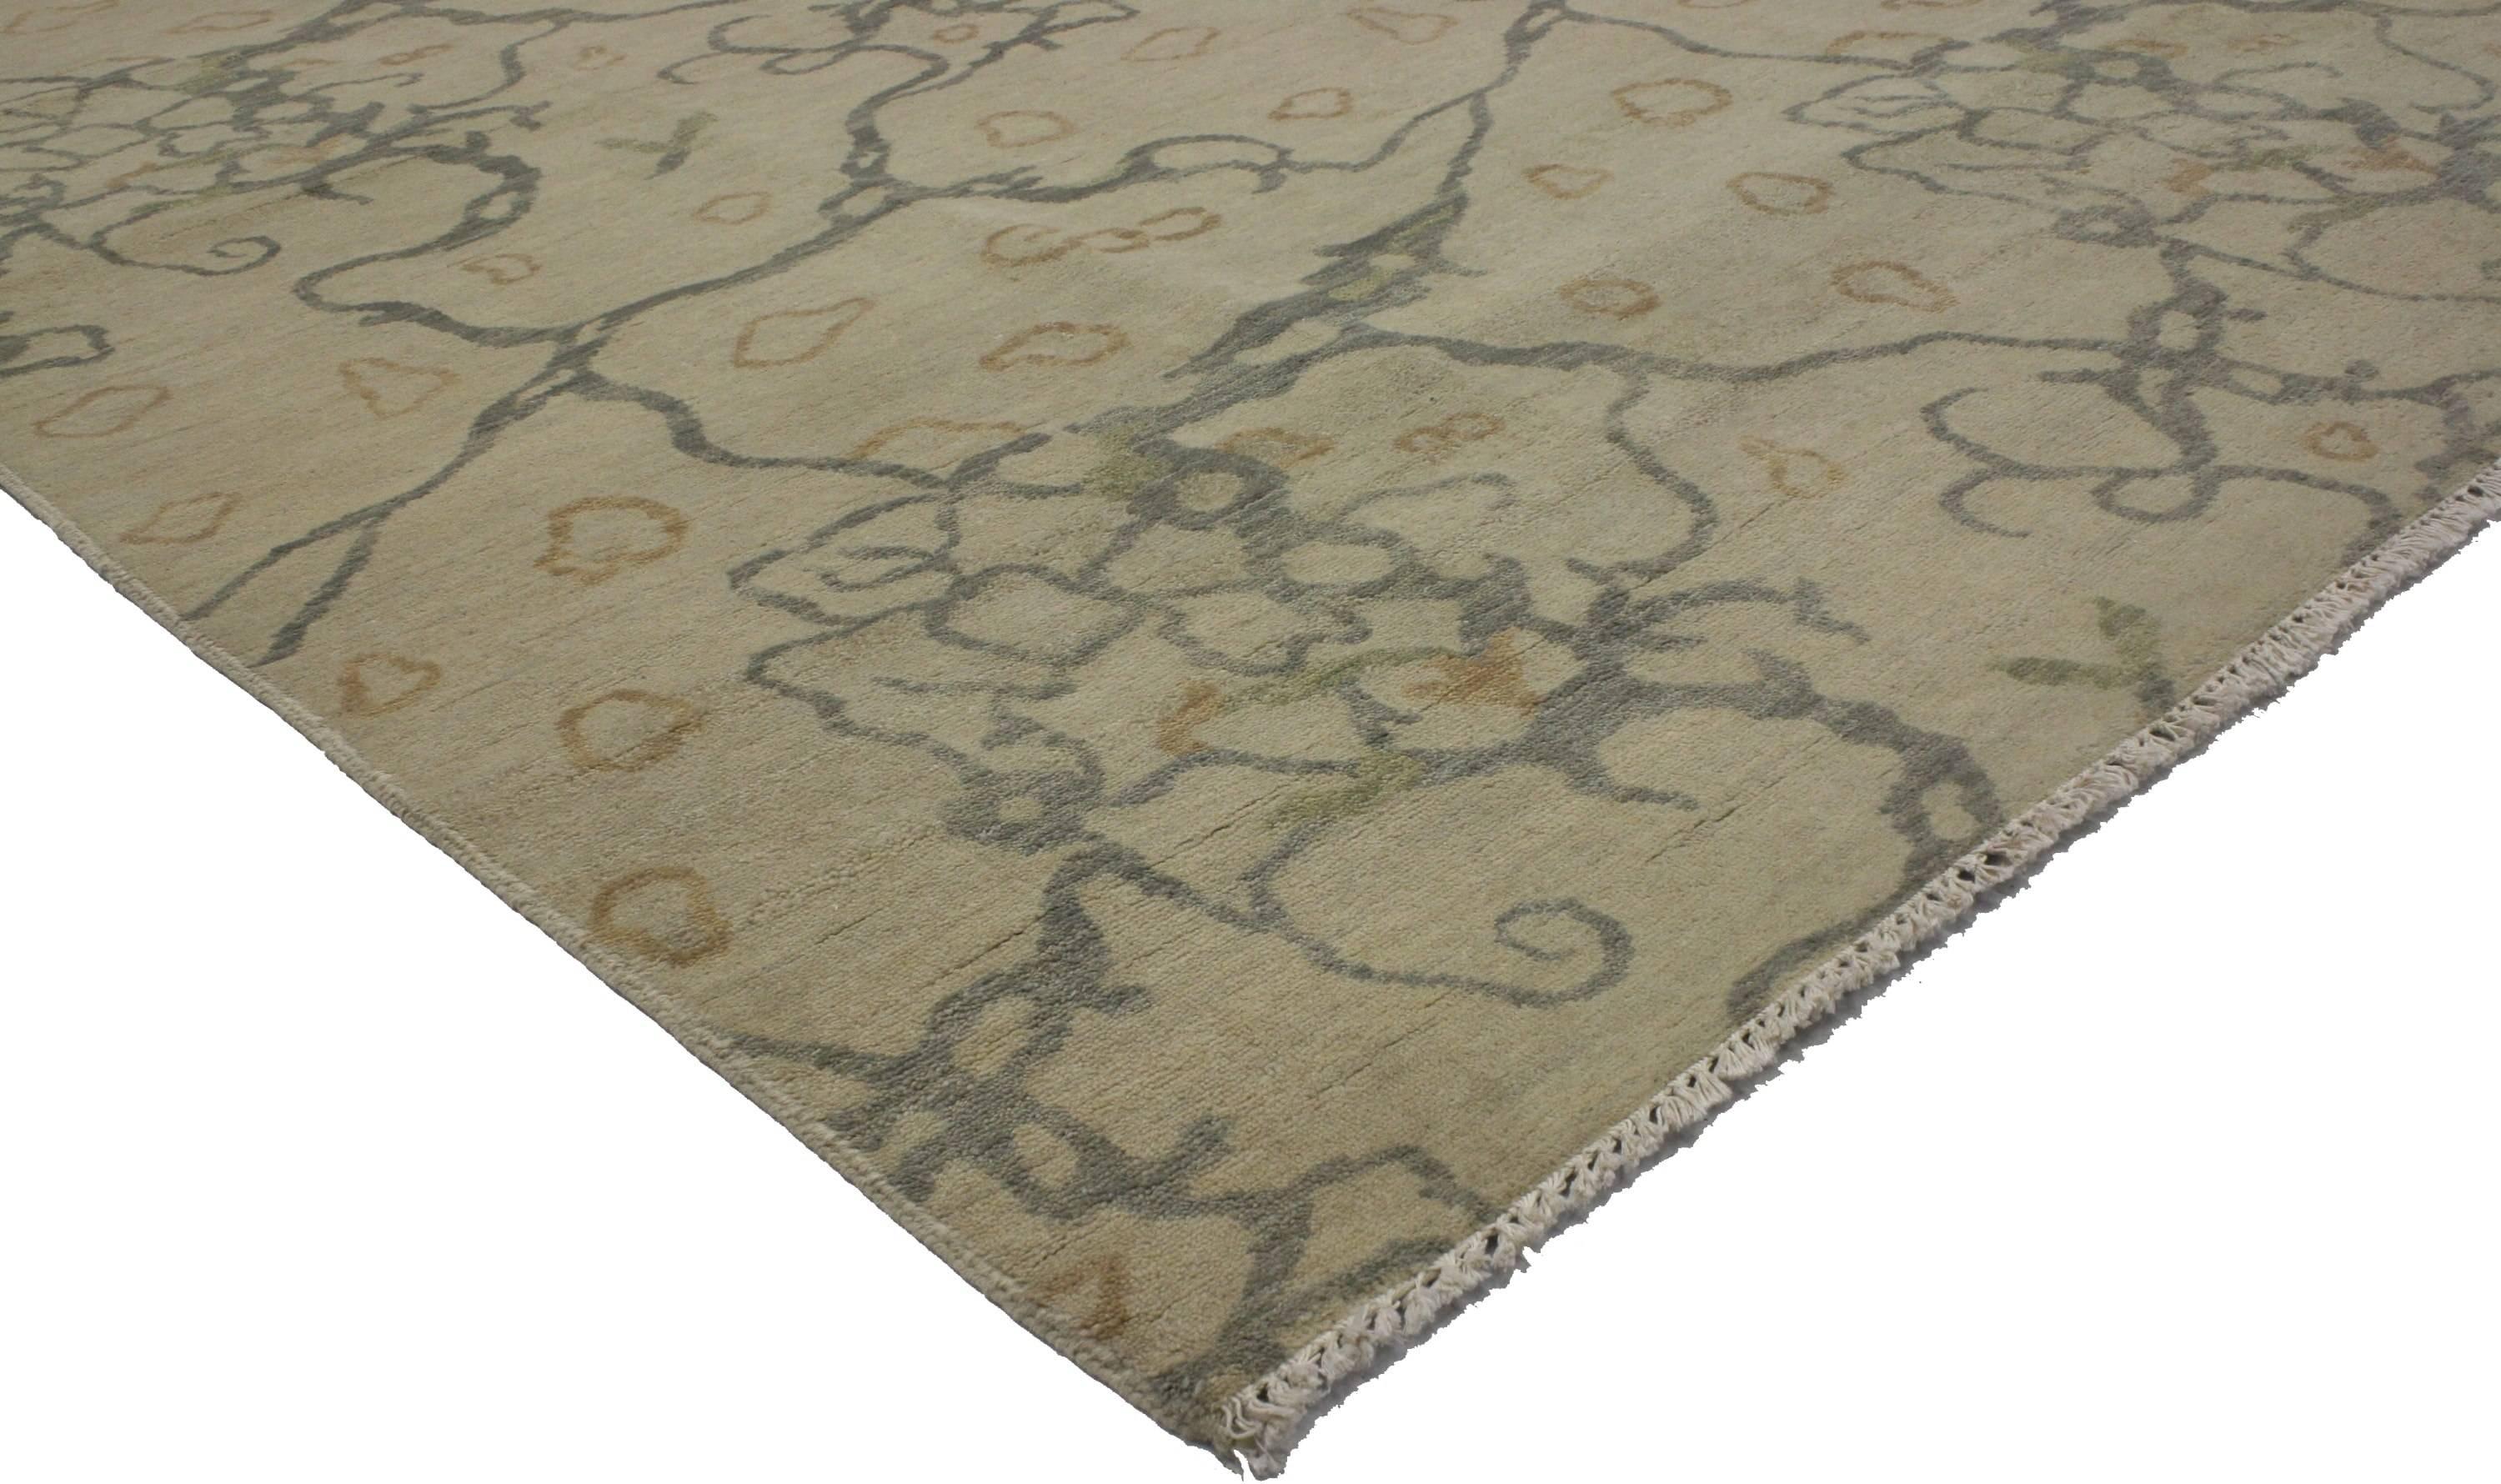 30303 New Transitional Area rug with Contemporary Abstract style and Biophilic design. Nature is alive with possibility in this hand knotted wool new contemporary area rug. It beautifully showcases a transitional style and biophilic design